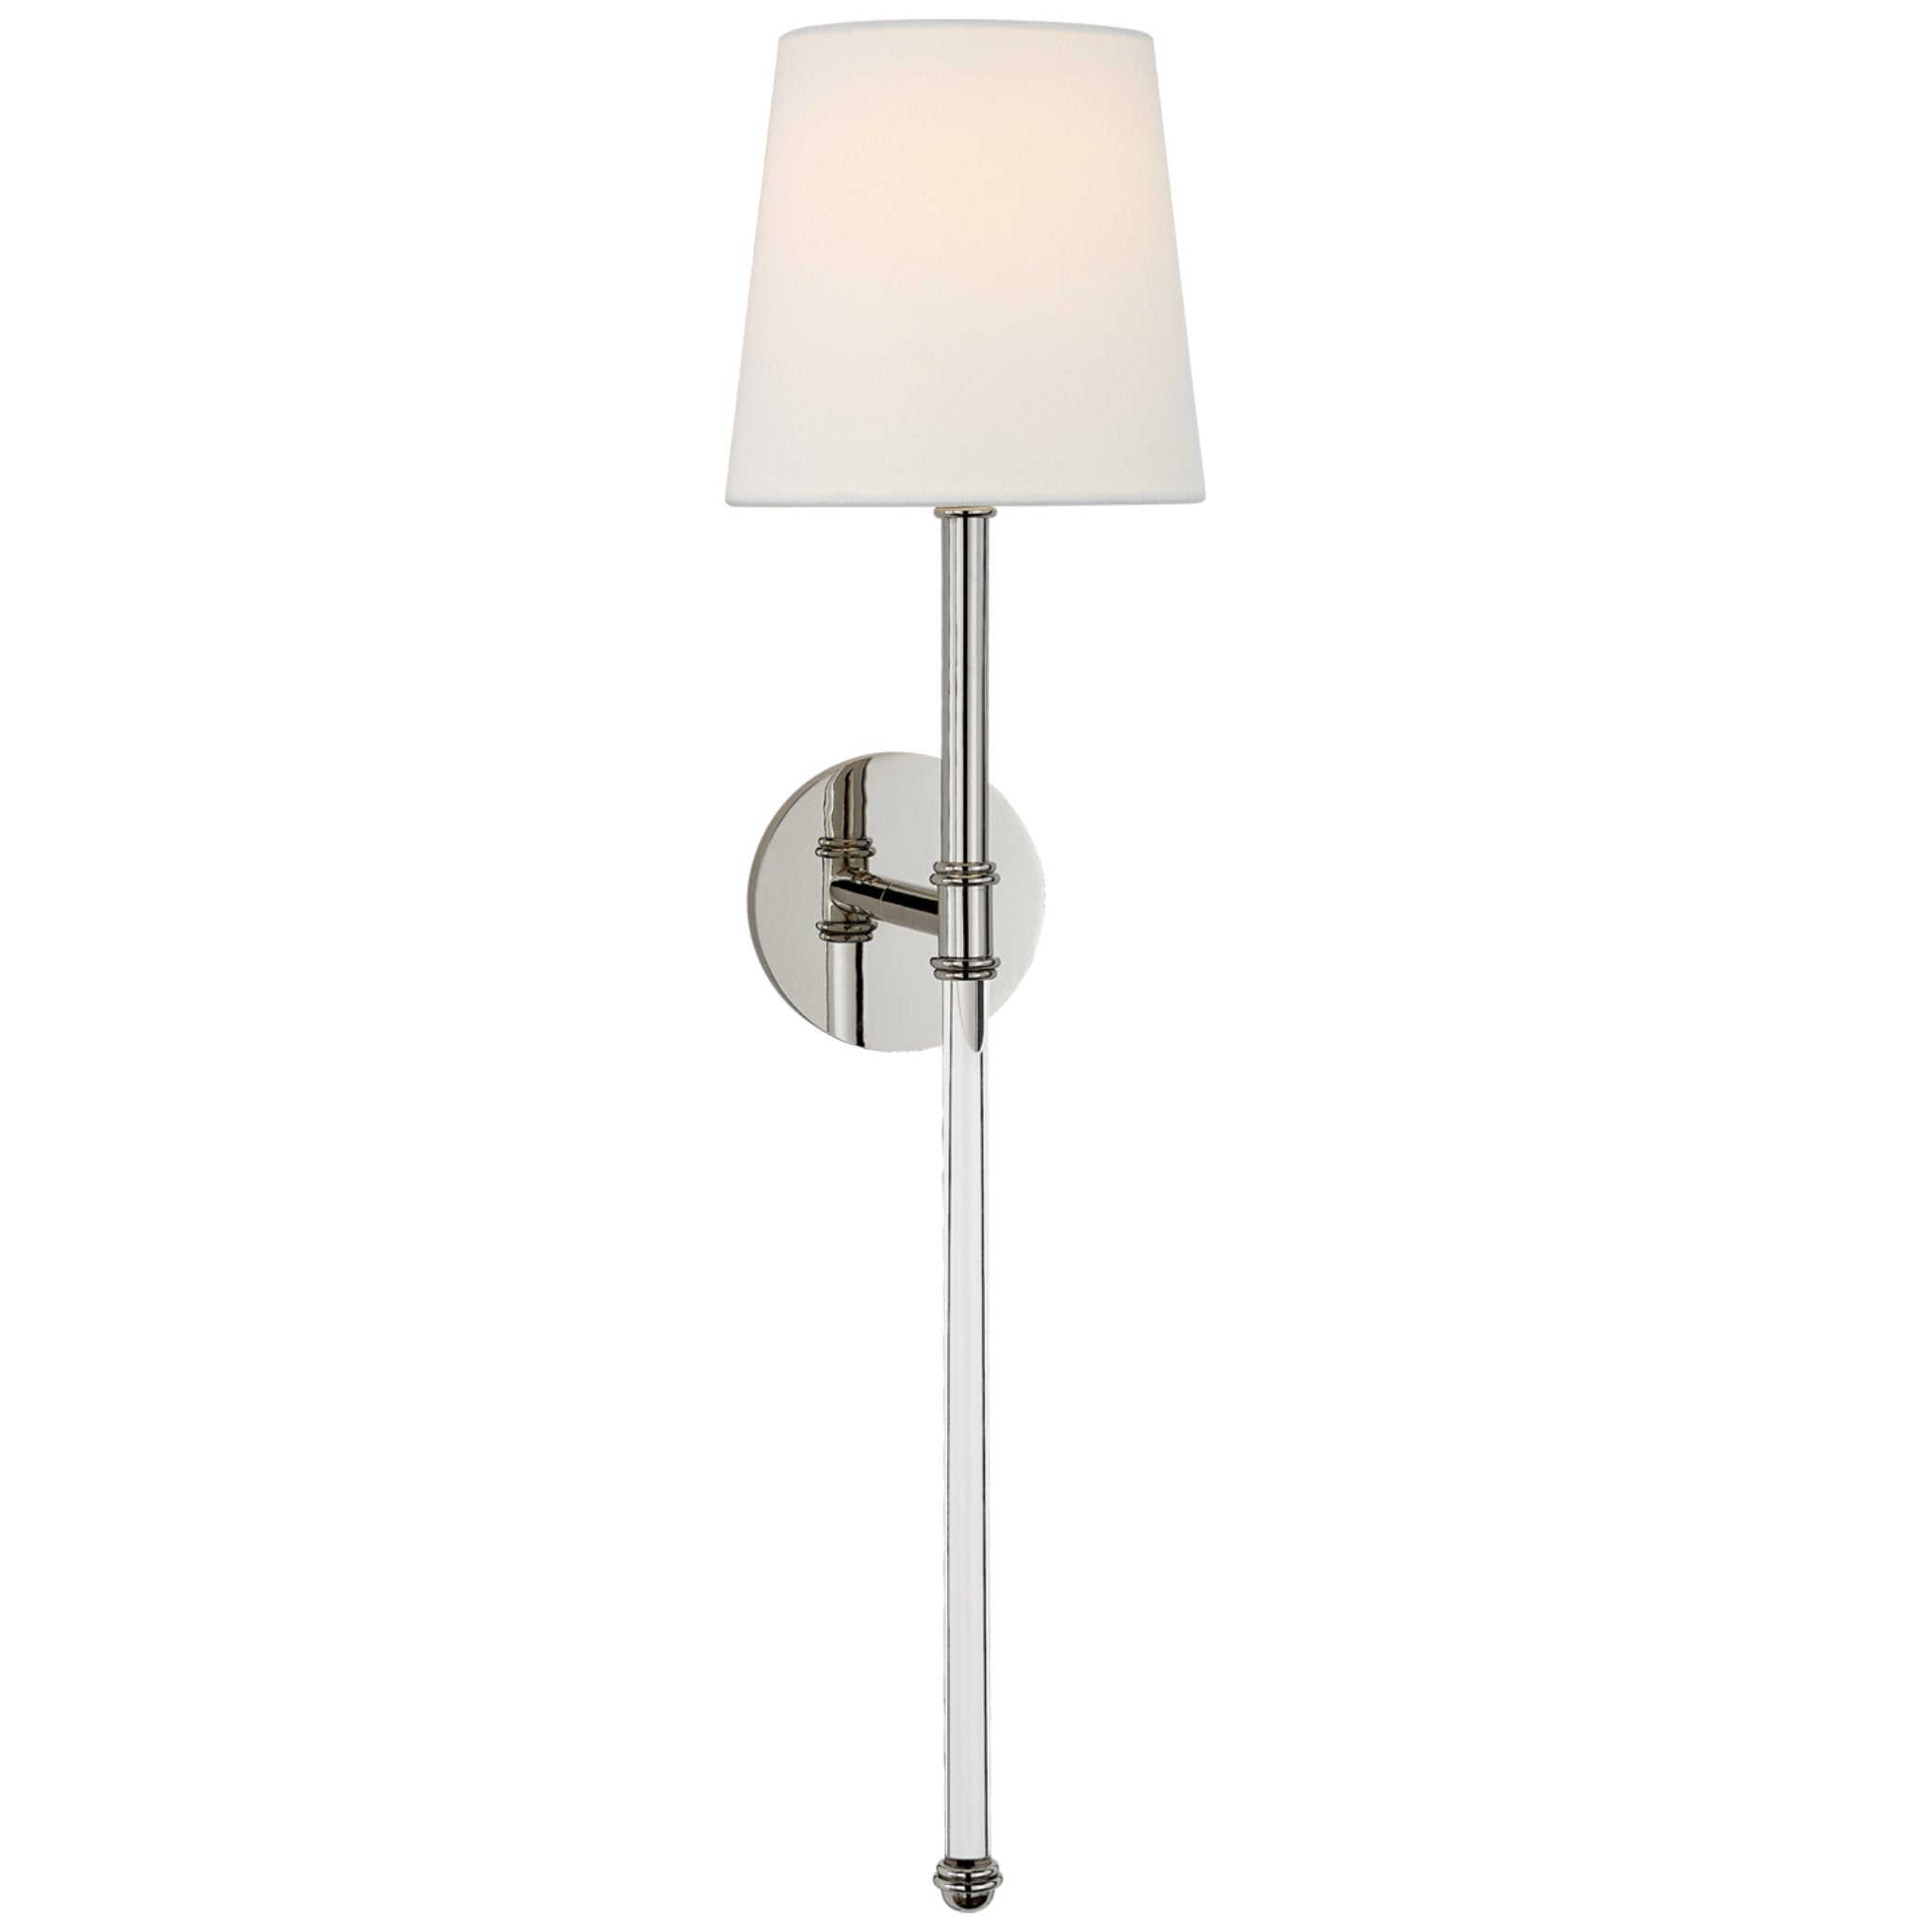 Suzanne Kasler Camille Large Tail Sconce in Polished Nickel with Linen Shade